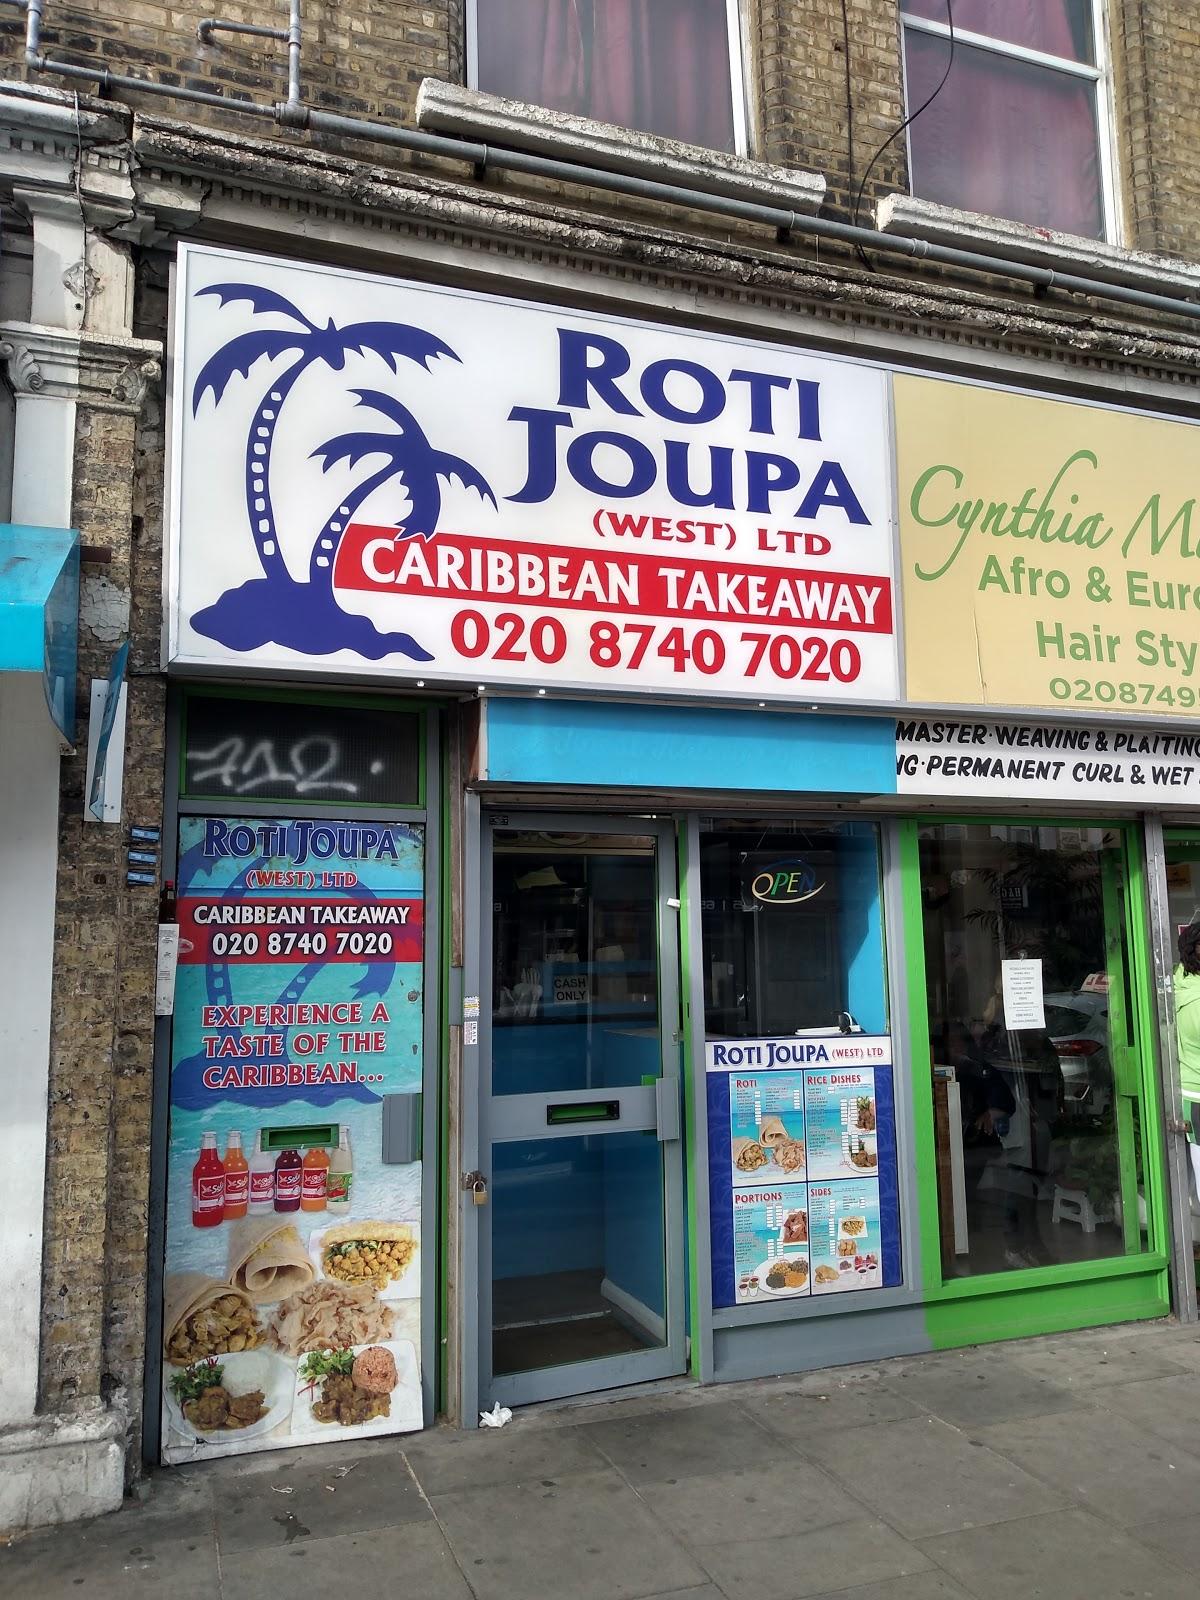 Roti Joupa the Mouthwatering flavours of the Caribbean